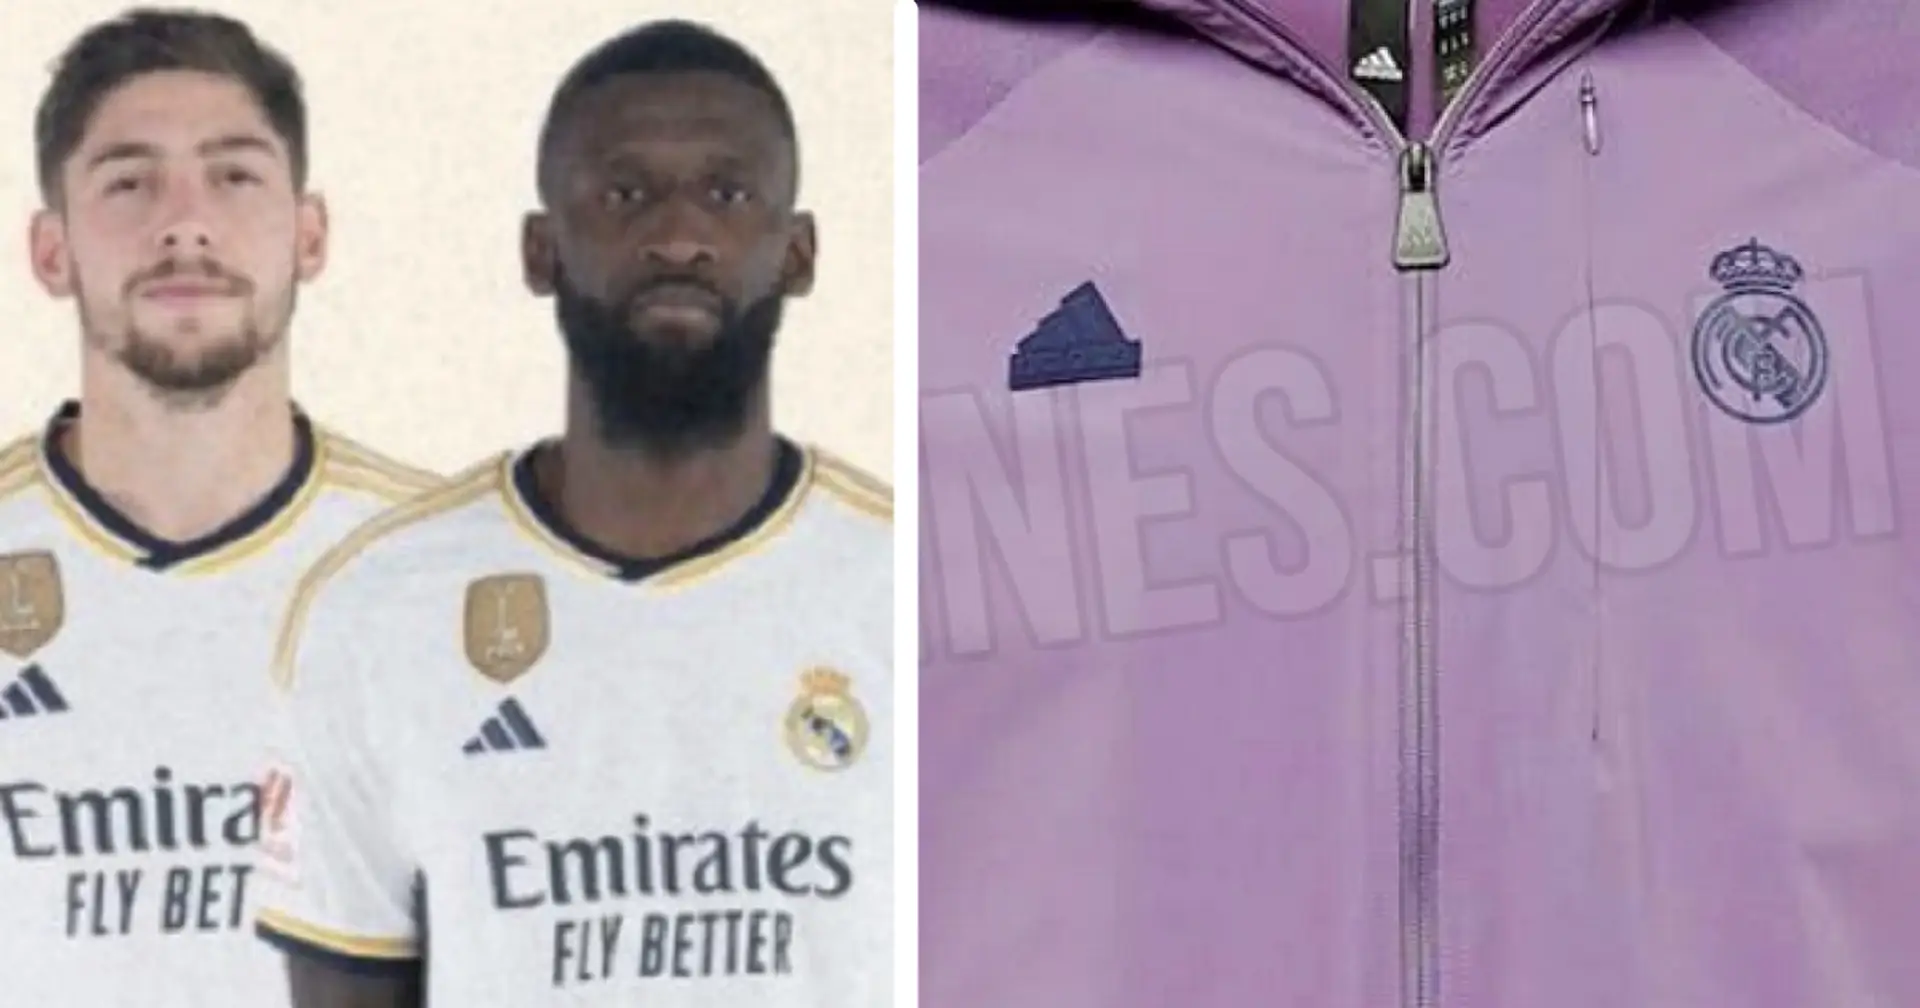 Real Madrid's 4th kit unveiled and 2 more under-radar stories of the day